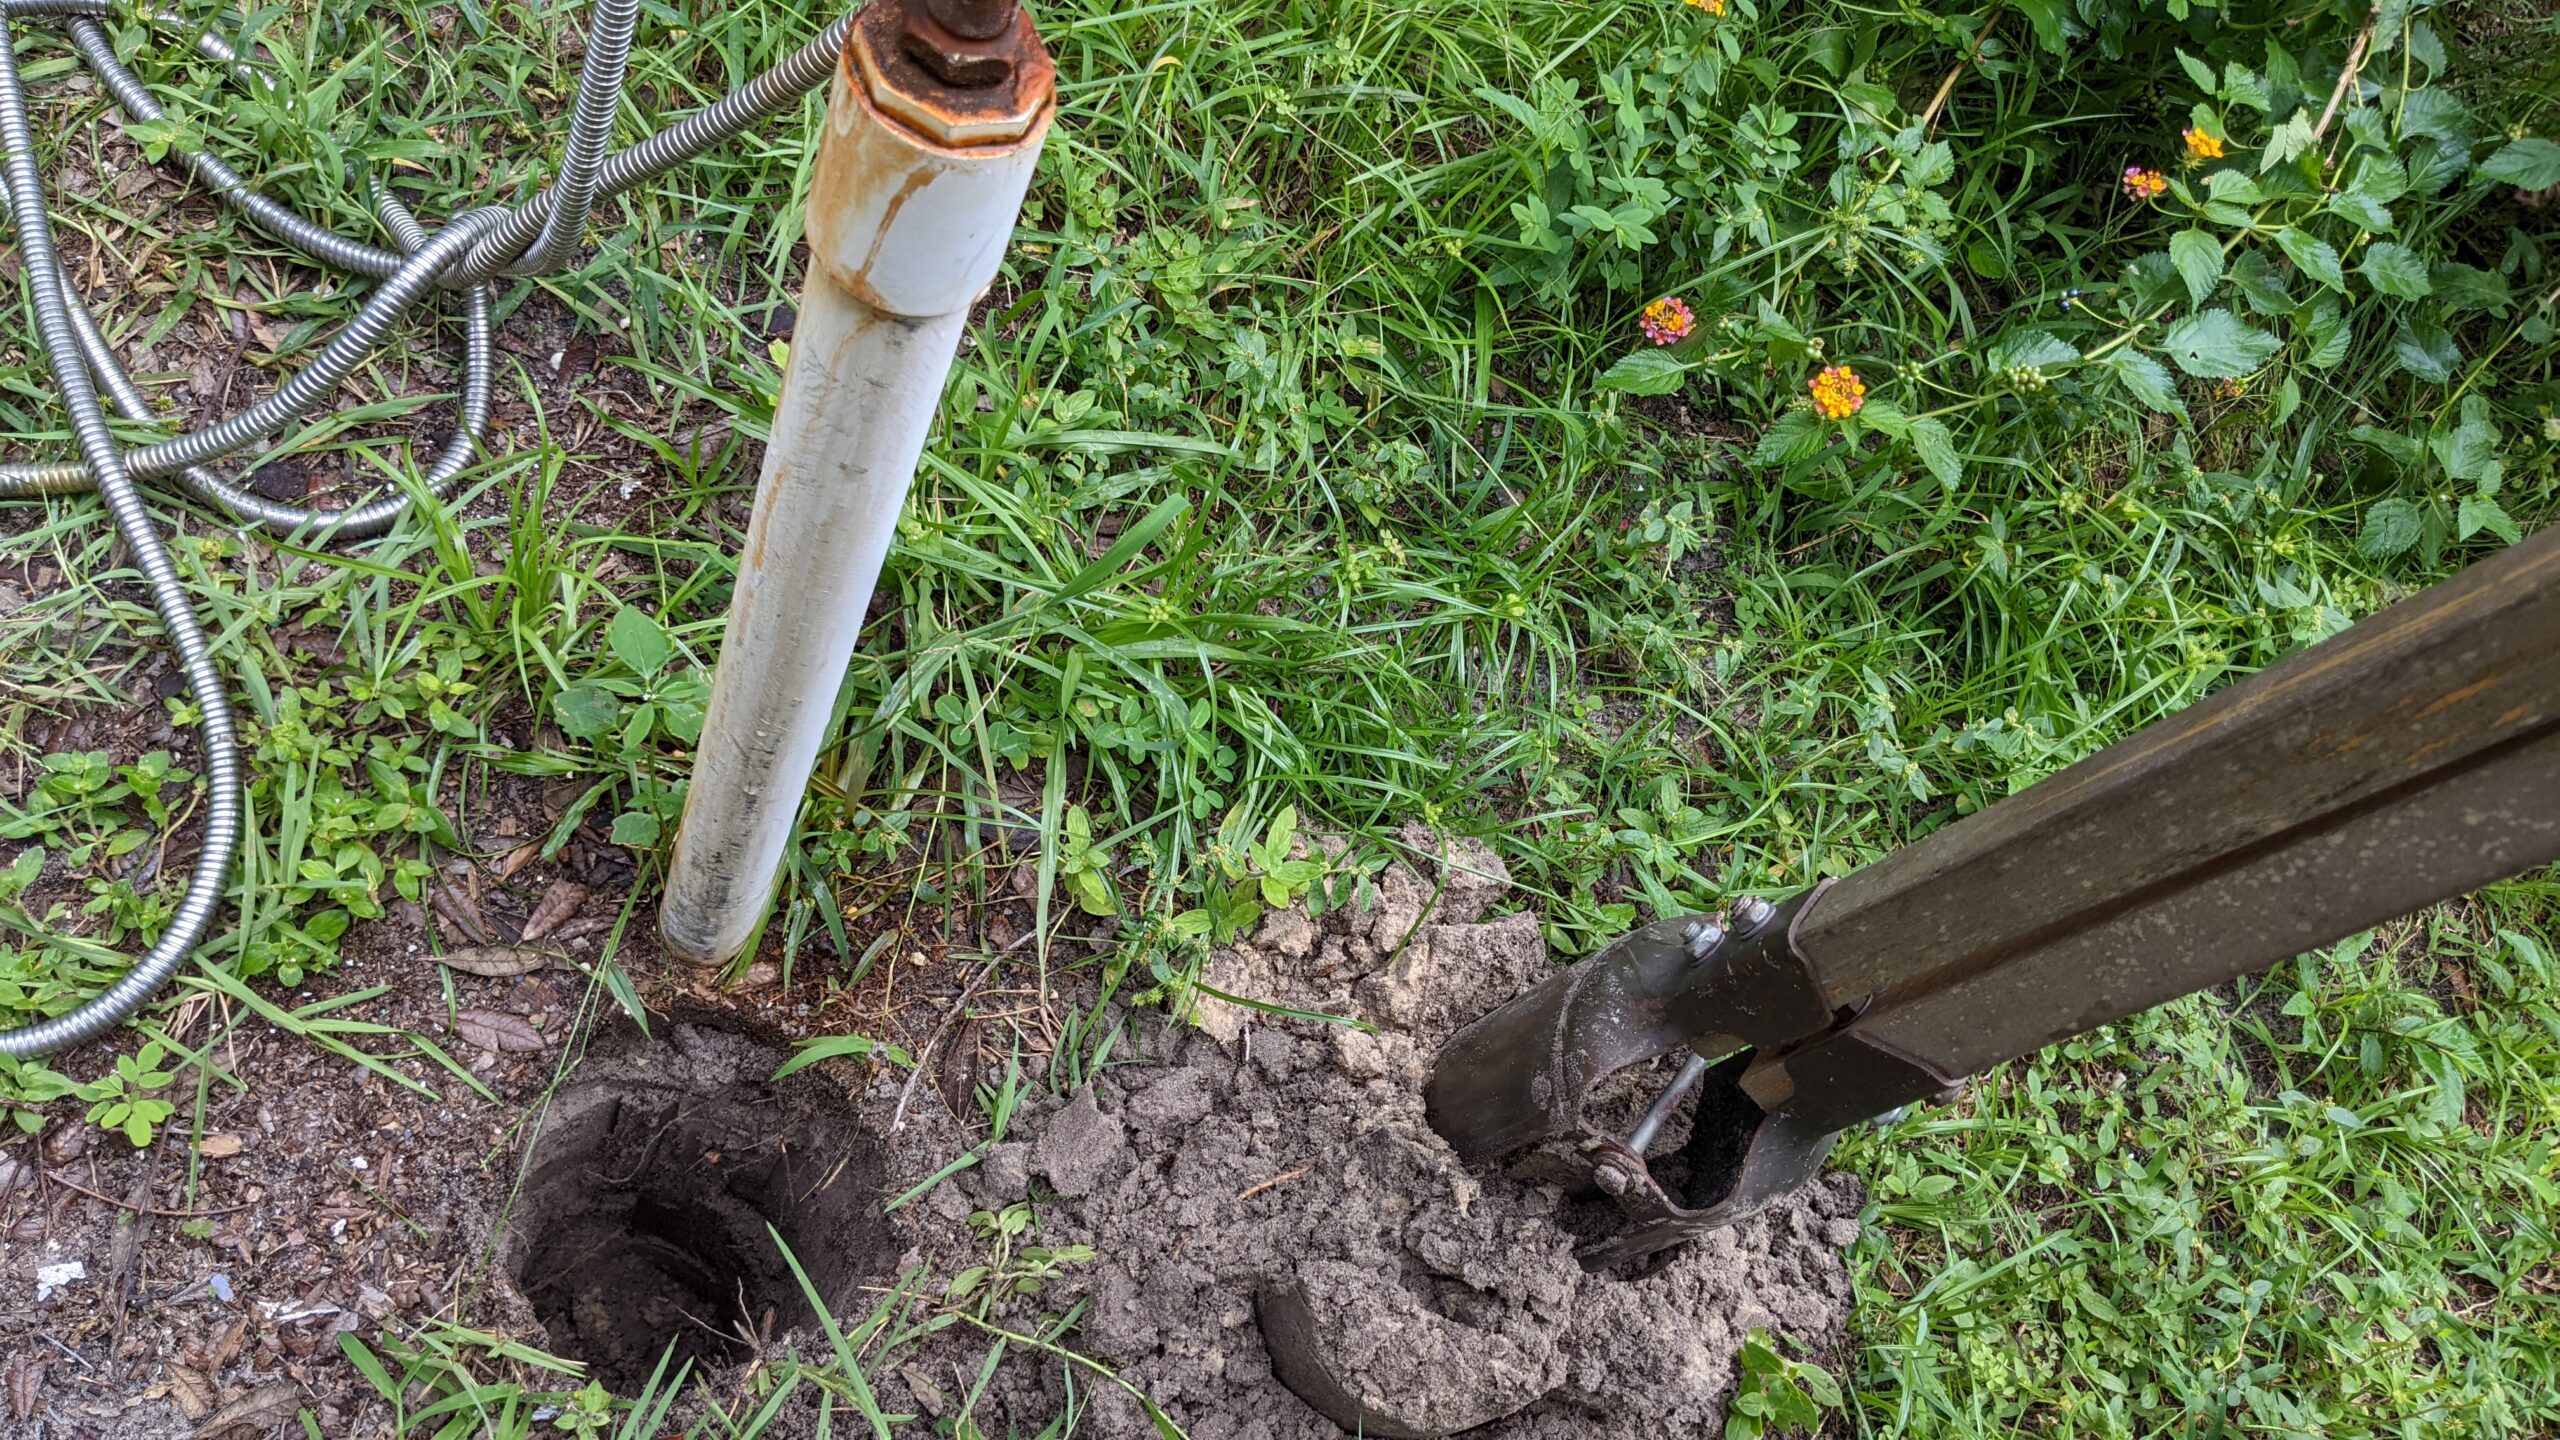 dug a hole with post hole digger near pvc water spigot